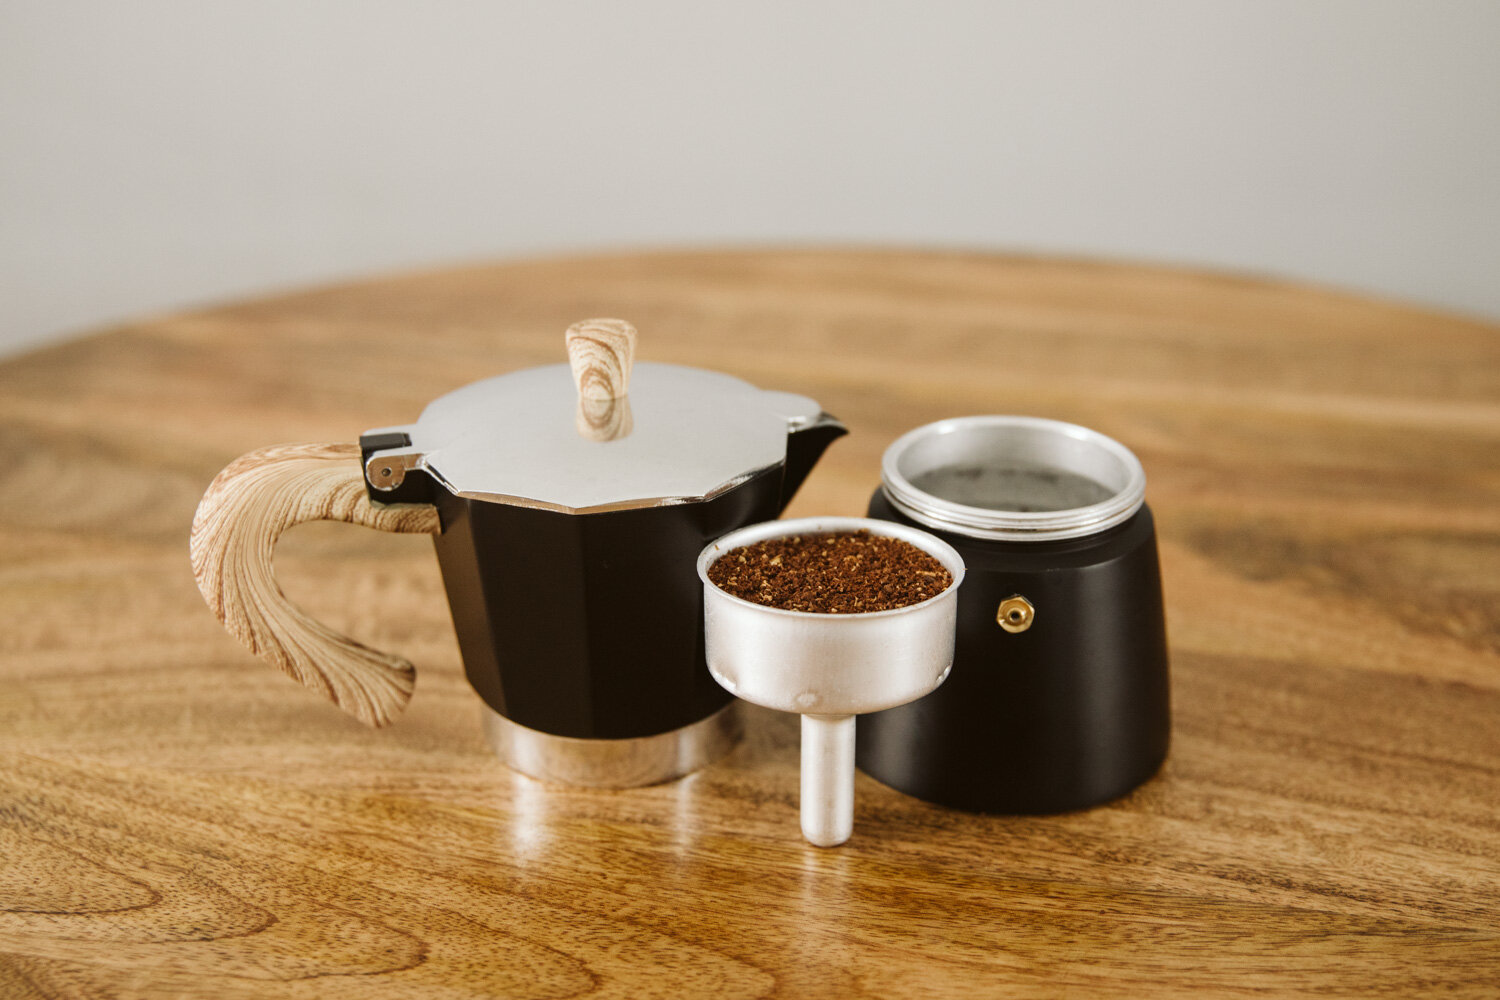 https://recipes.net/wp-content/uploads/2024/01/how-to-grind-coffee-for-moka-pot-1704347587.jpg